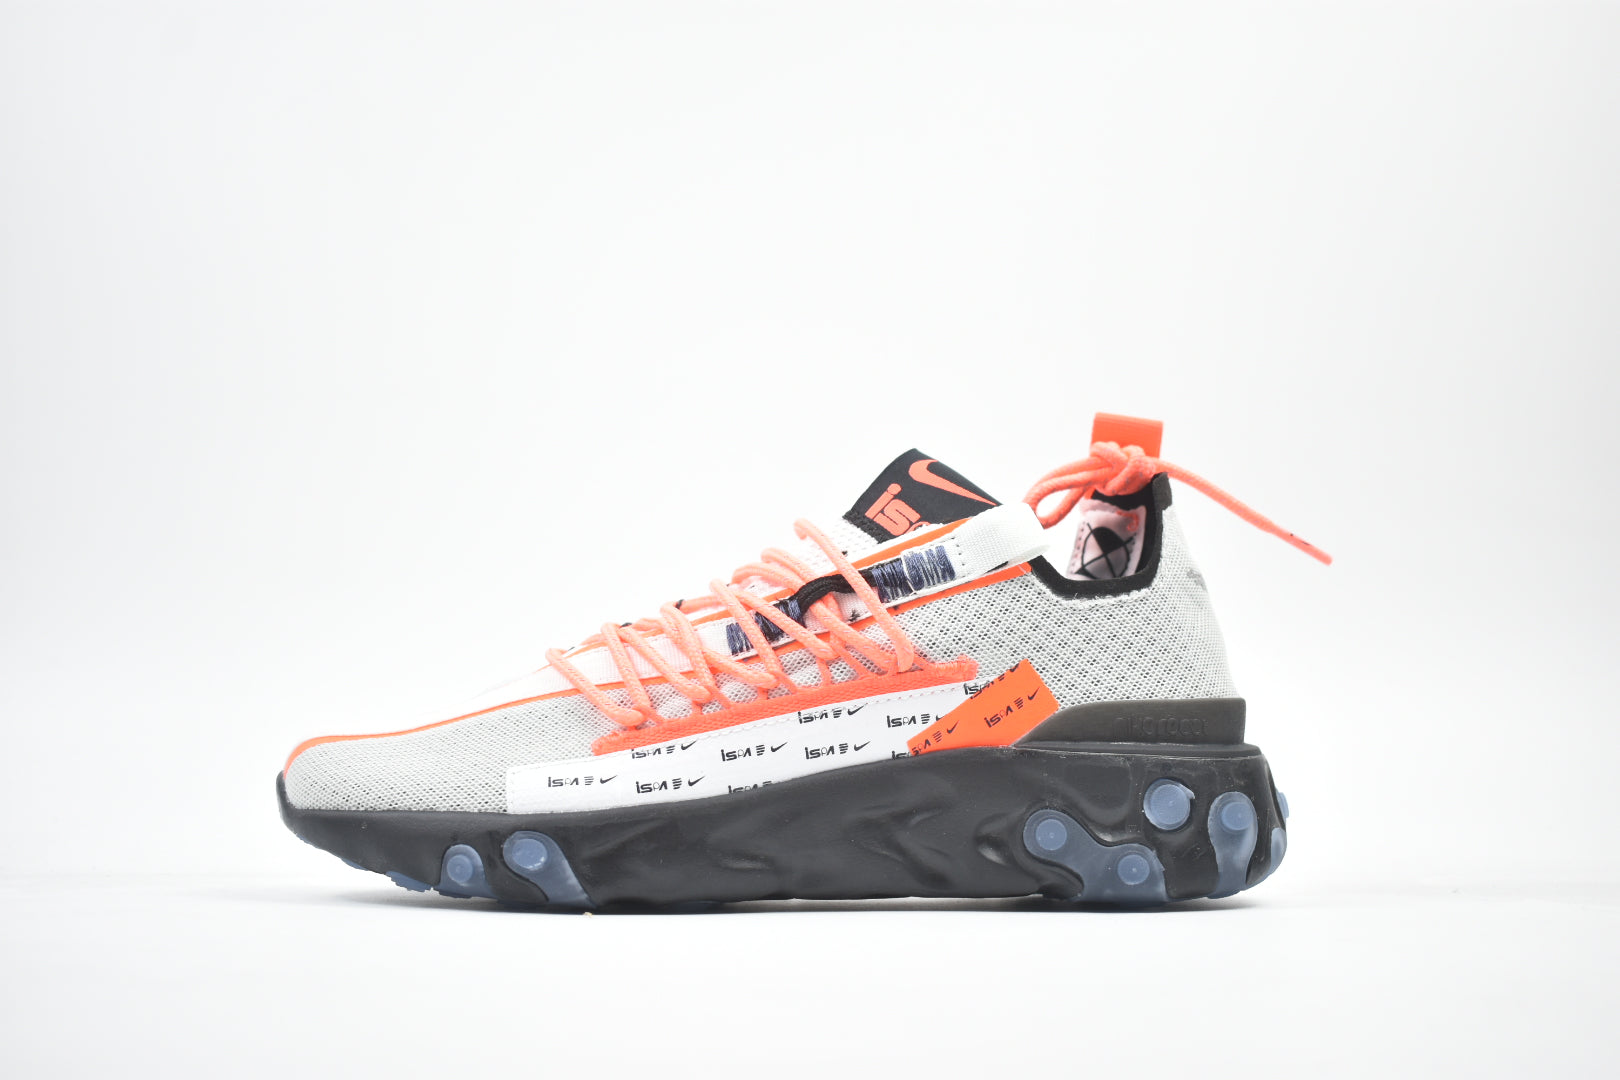 React Element Wr Ispa - whatever on 